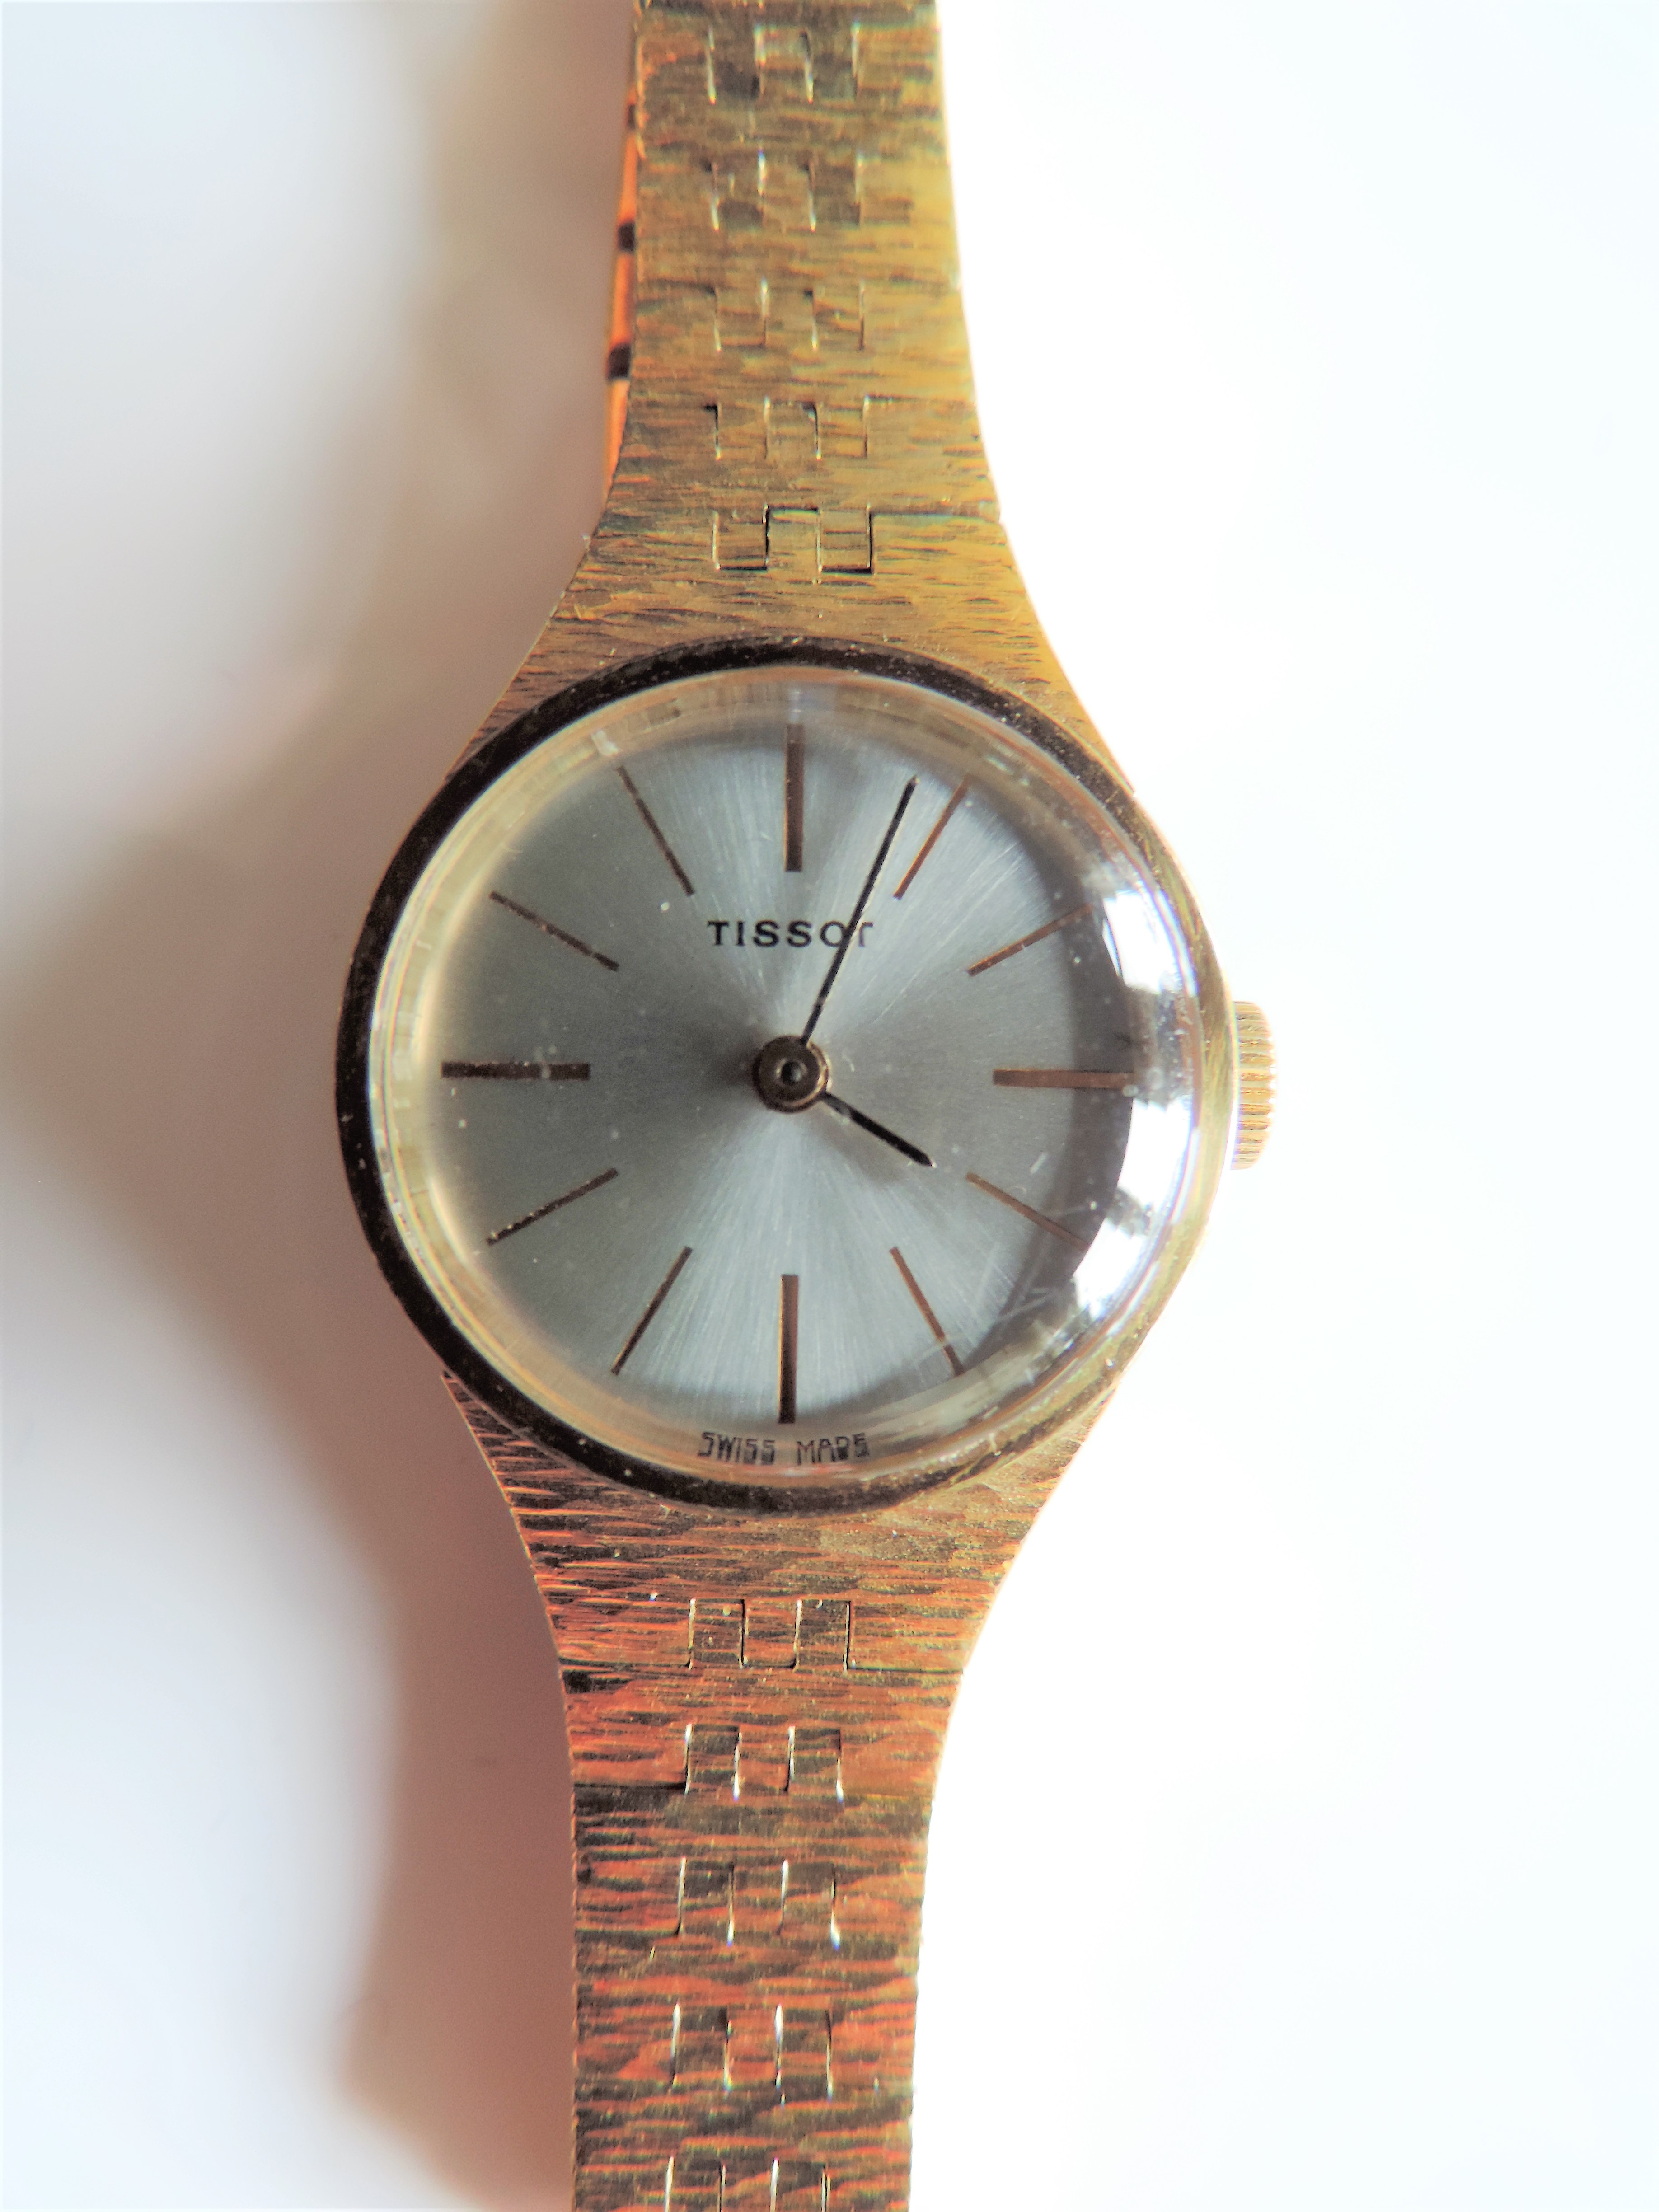 Vintage Ladies Tissot Gold Plated Watch - Image 5 of 7